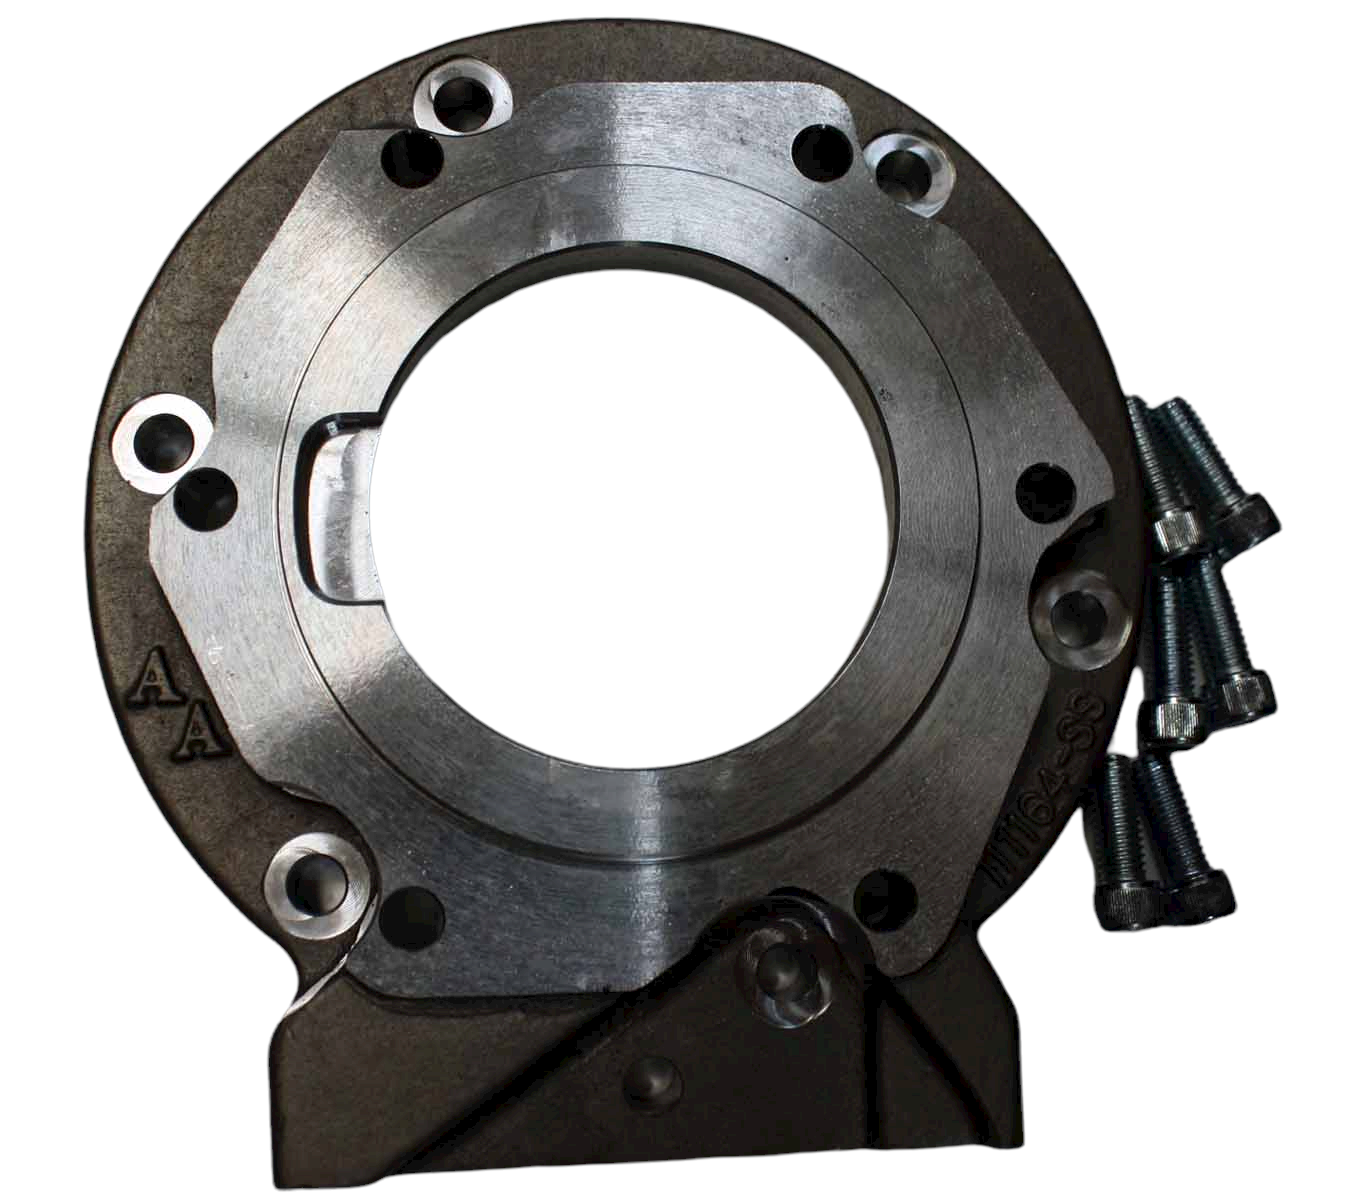 AS-6408 Transmission Adapter, 4L80E To Atlas 1.25 Adapter